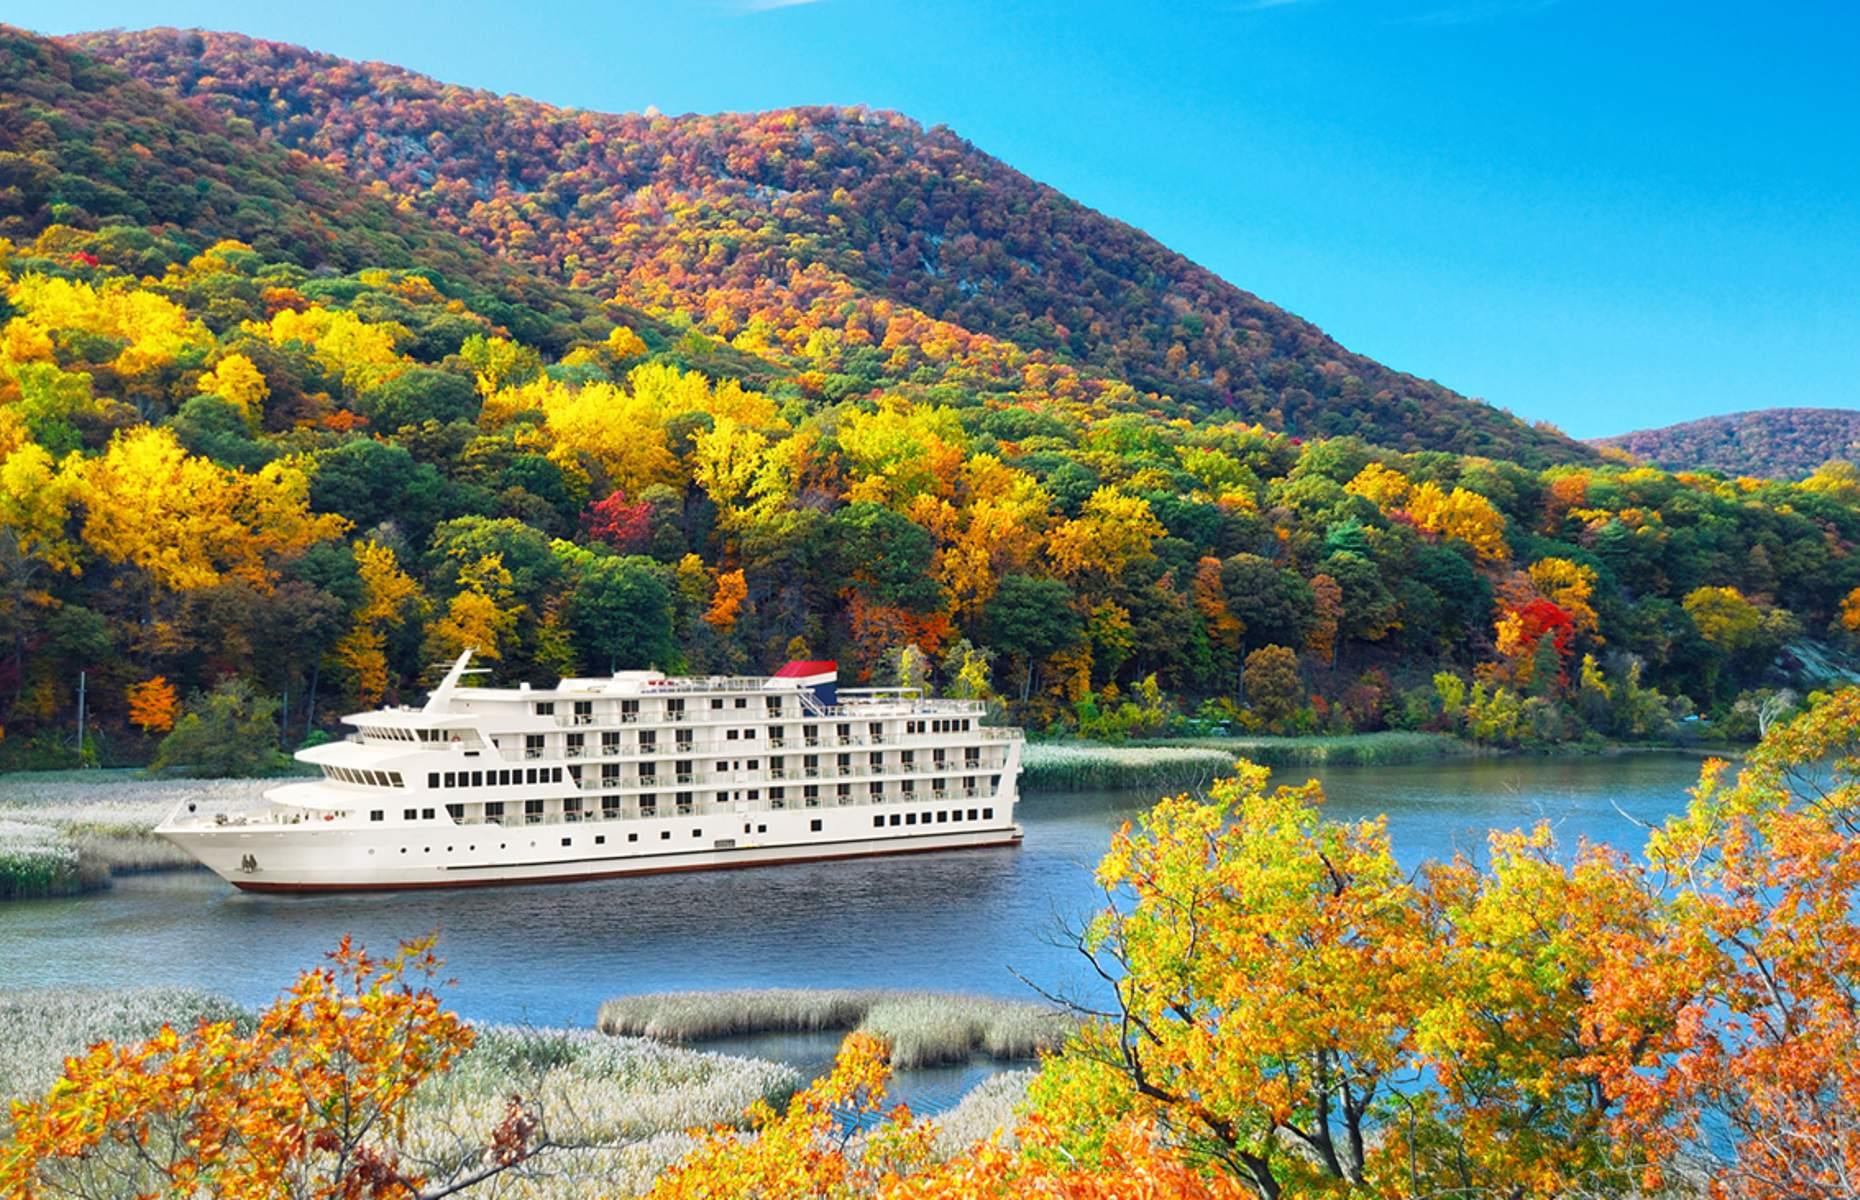 <p><a href="https://www.americancruiselines.com/cruises/new-england-cruises/hudson-river-cruises">This New York round trip</a> takes in the Hudson River’s best bits, busting the myth that its most spectacular section weaves through the Big Apple. You’ll explore it on the American Star, which has room for just 100 passengers and offers several stop-offs in the beautiful Catskill Mountains area. The cruise is especially popular with fans of architecture, who come to admire historic buildings such as the Vanderbilt Mansion (the former home of Franklin D. Roosevelt). </p>